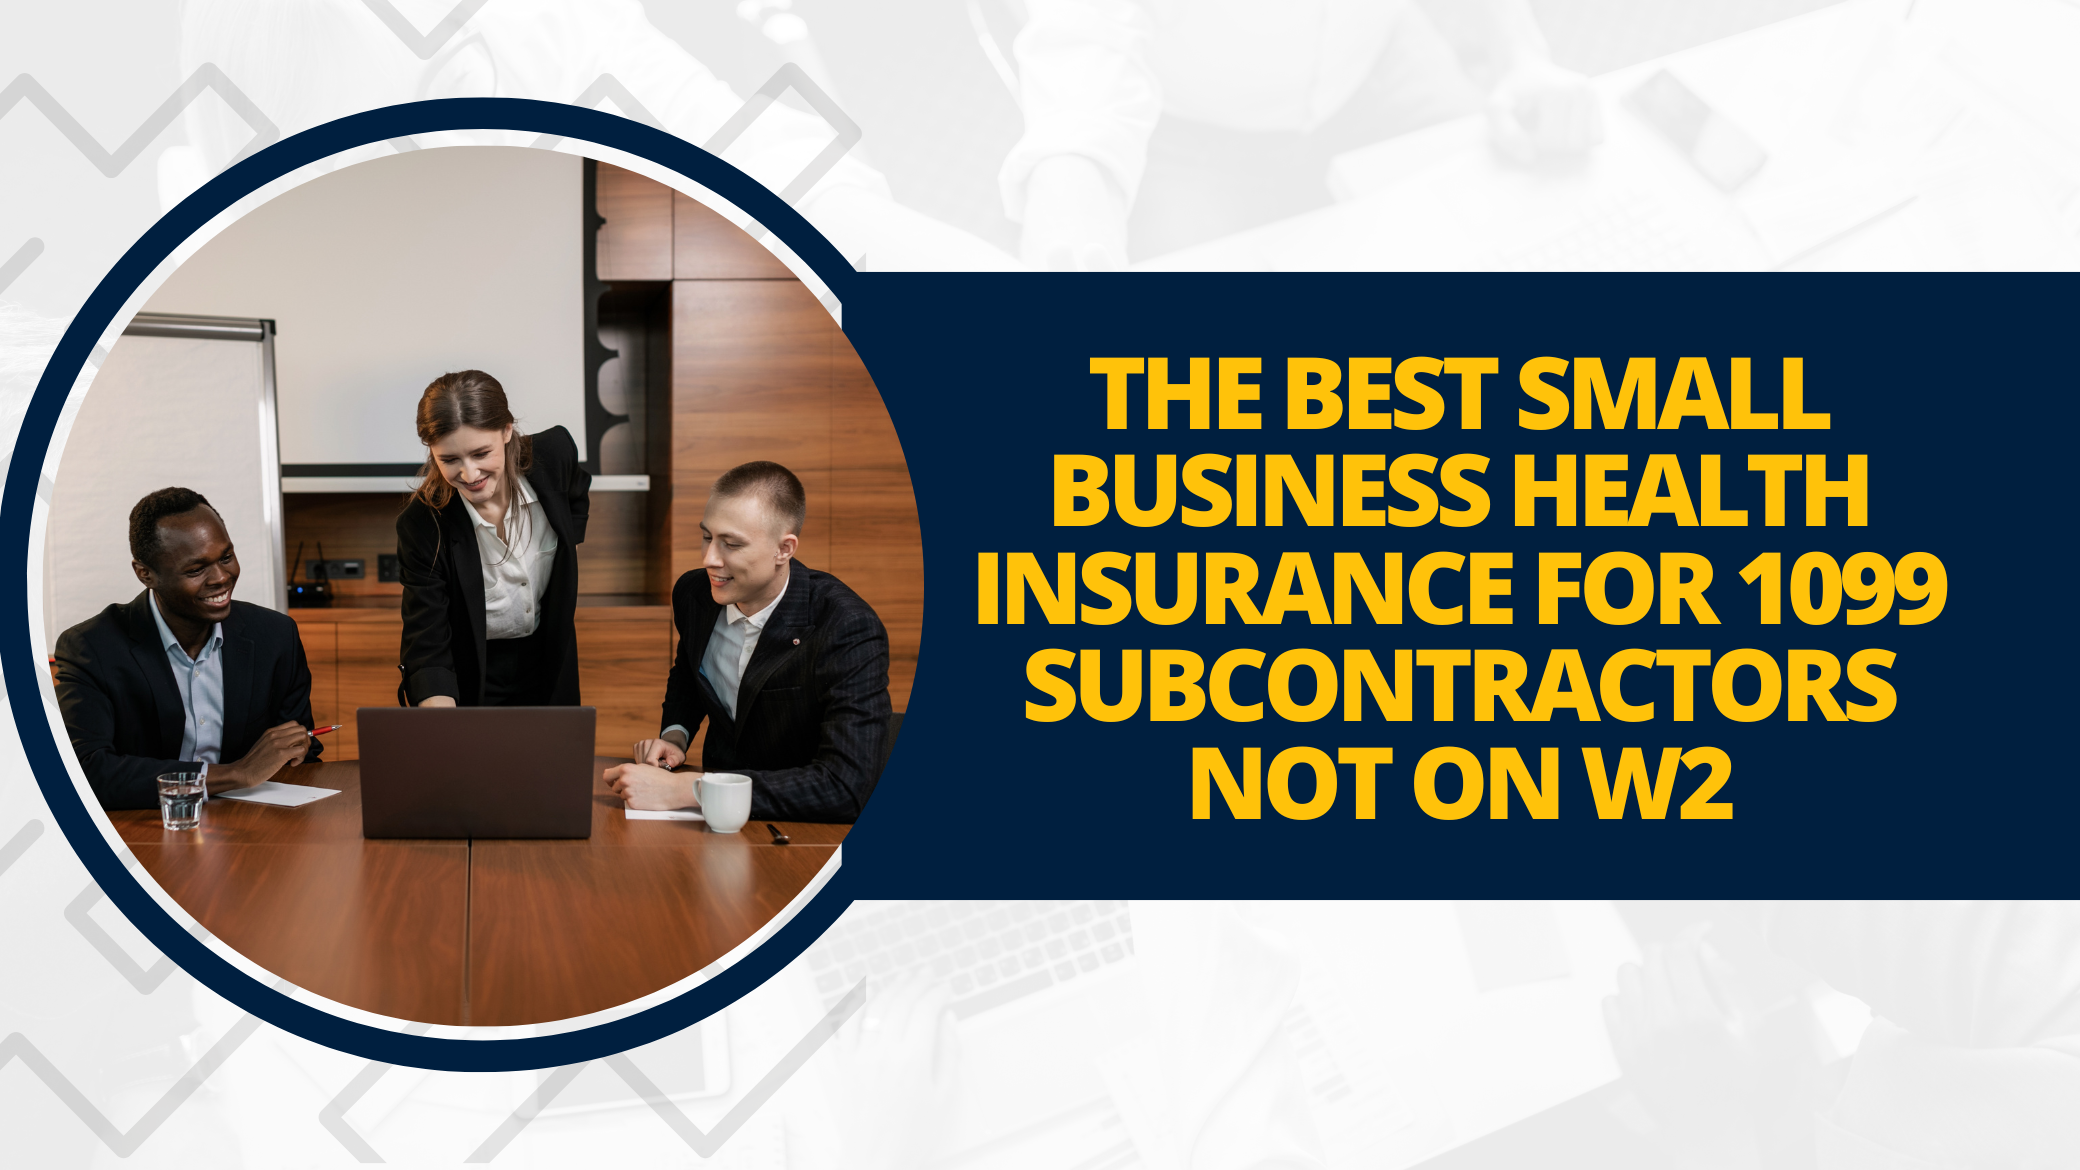 The Best Small Business Health Insurance For 1099 Subcontractors Not On W2